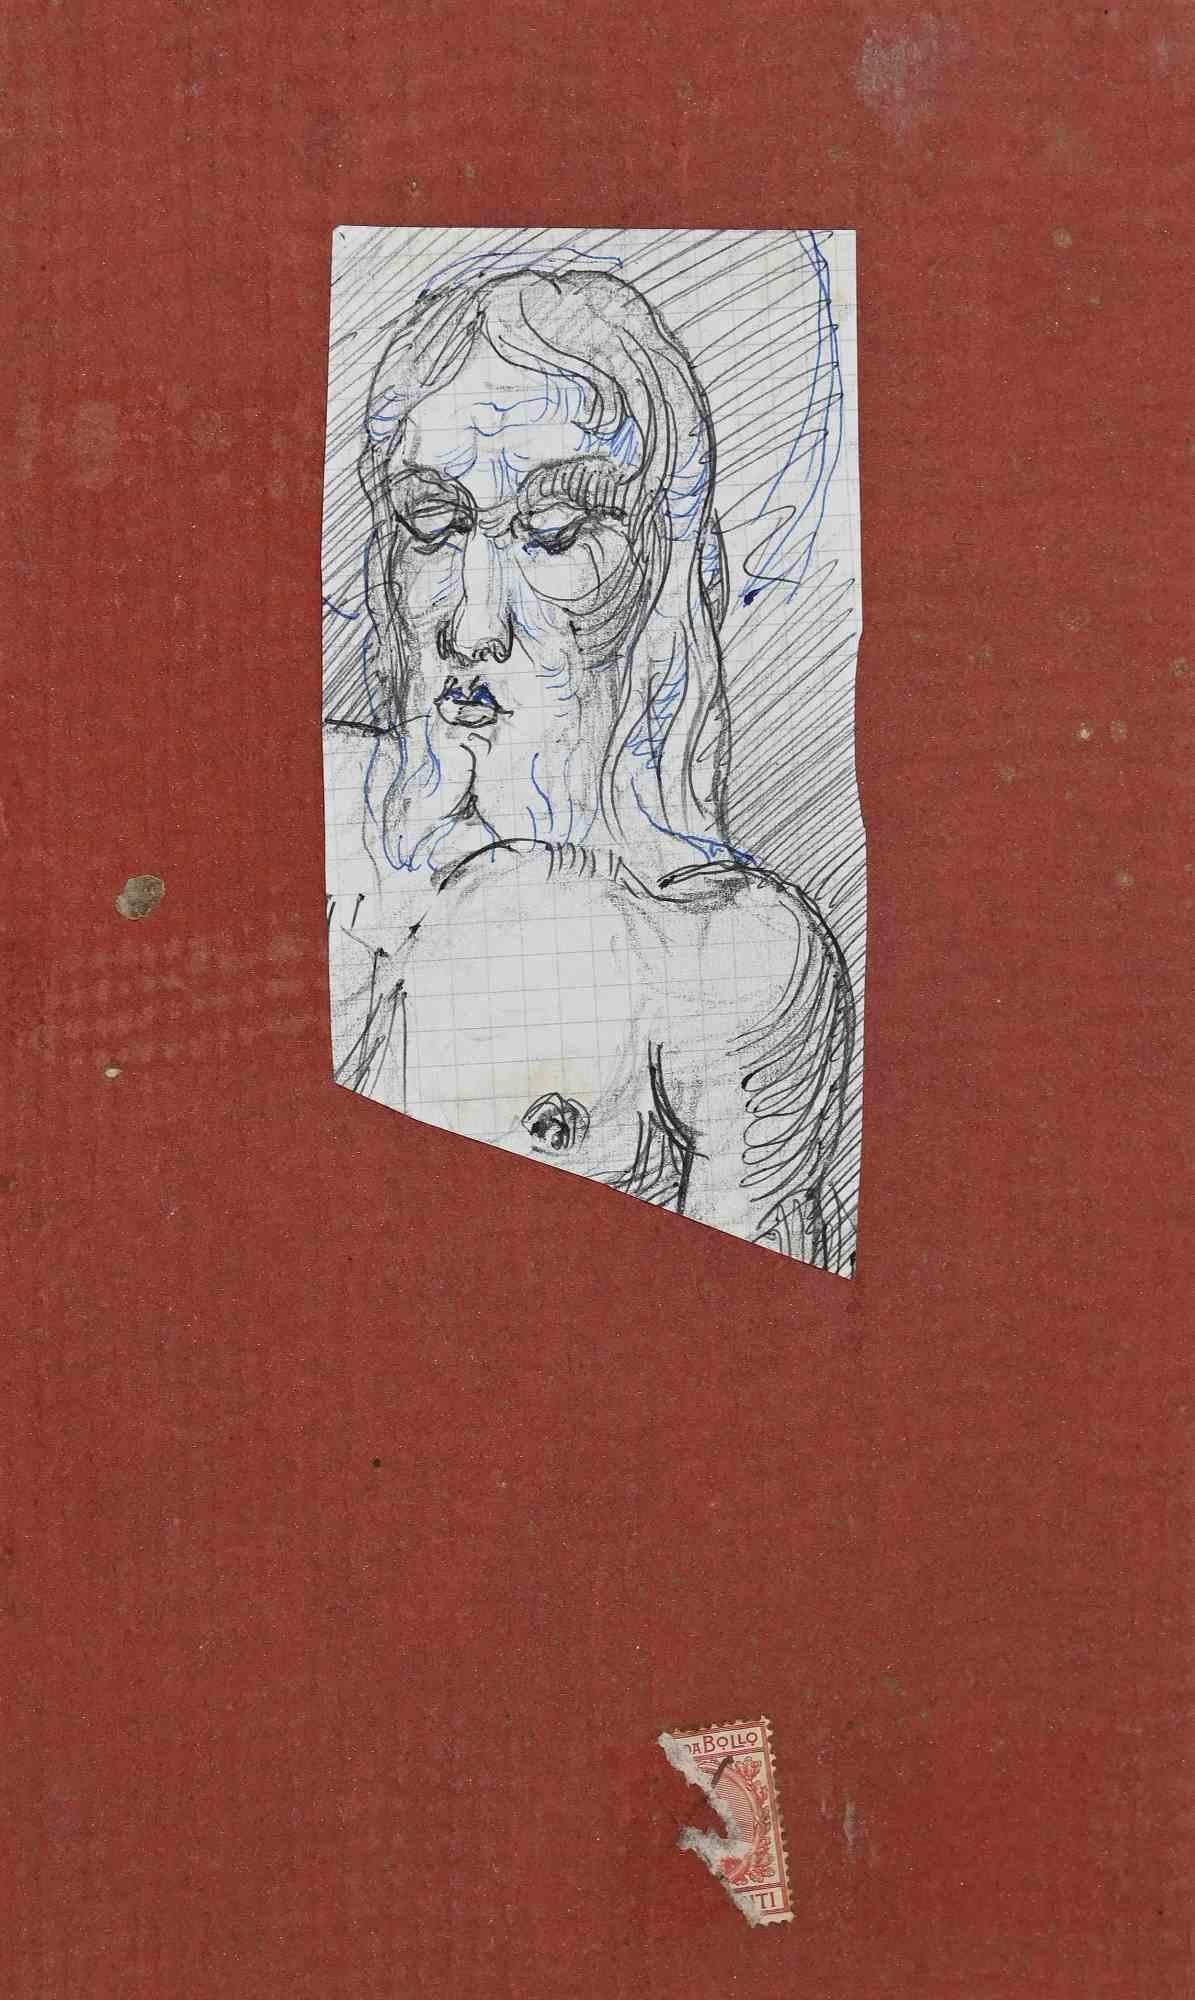 Portrait of Christ - Original Drawing - Early 20th Century